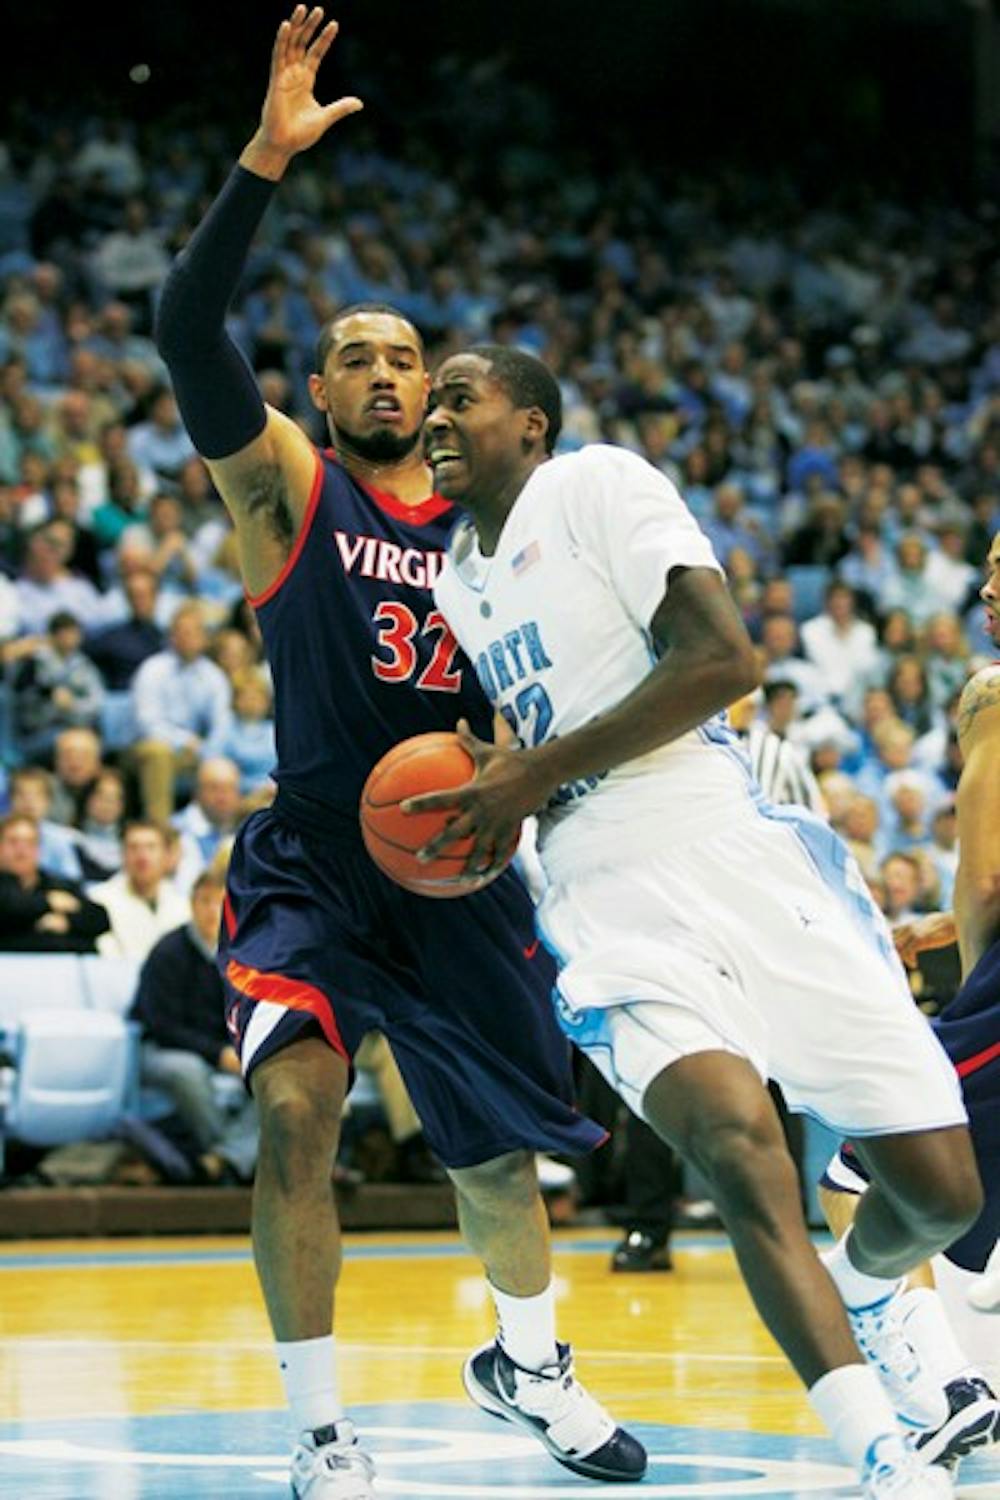 Ed Davis, usually one of UNC's leading scorers, contributed only 4 points in Sunday's loss to Virginia. DTH/Will Cooper